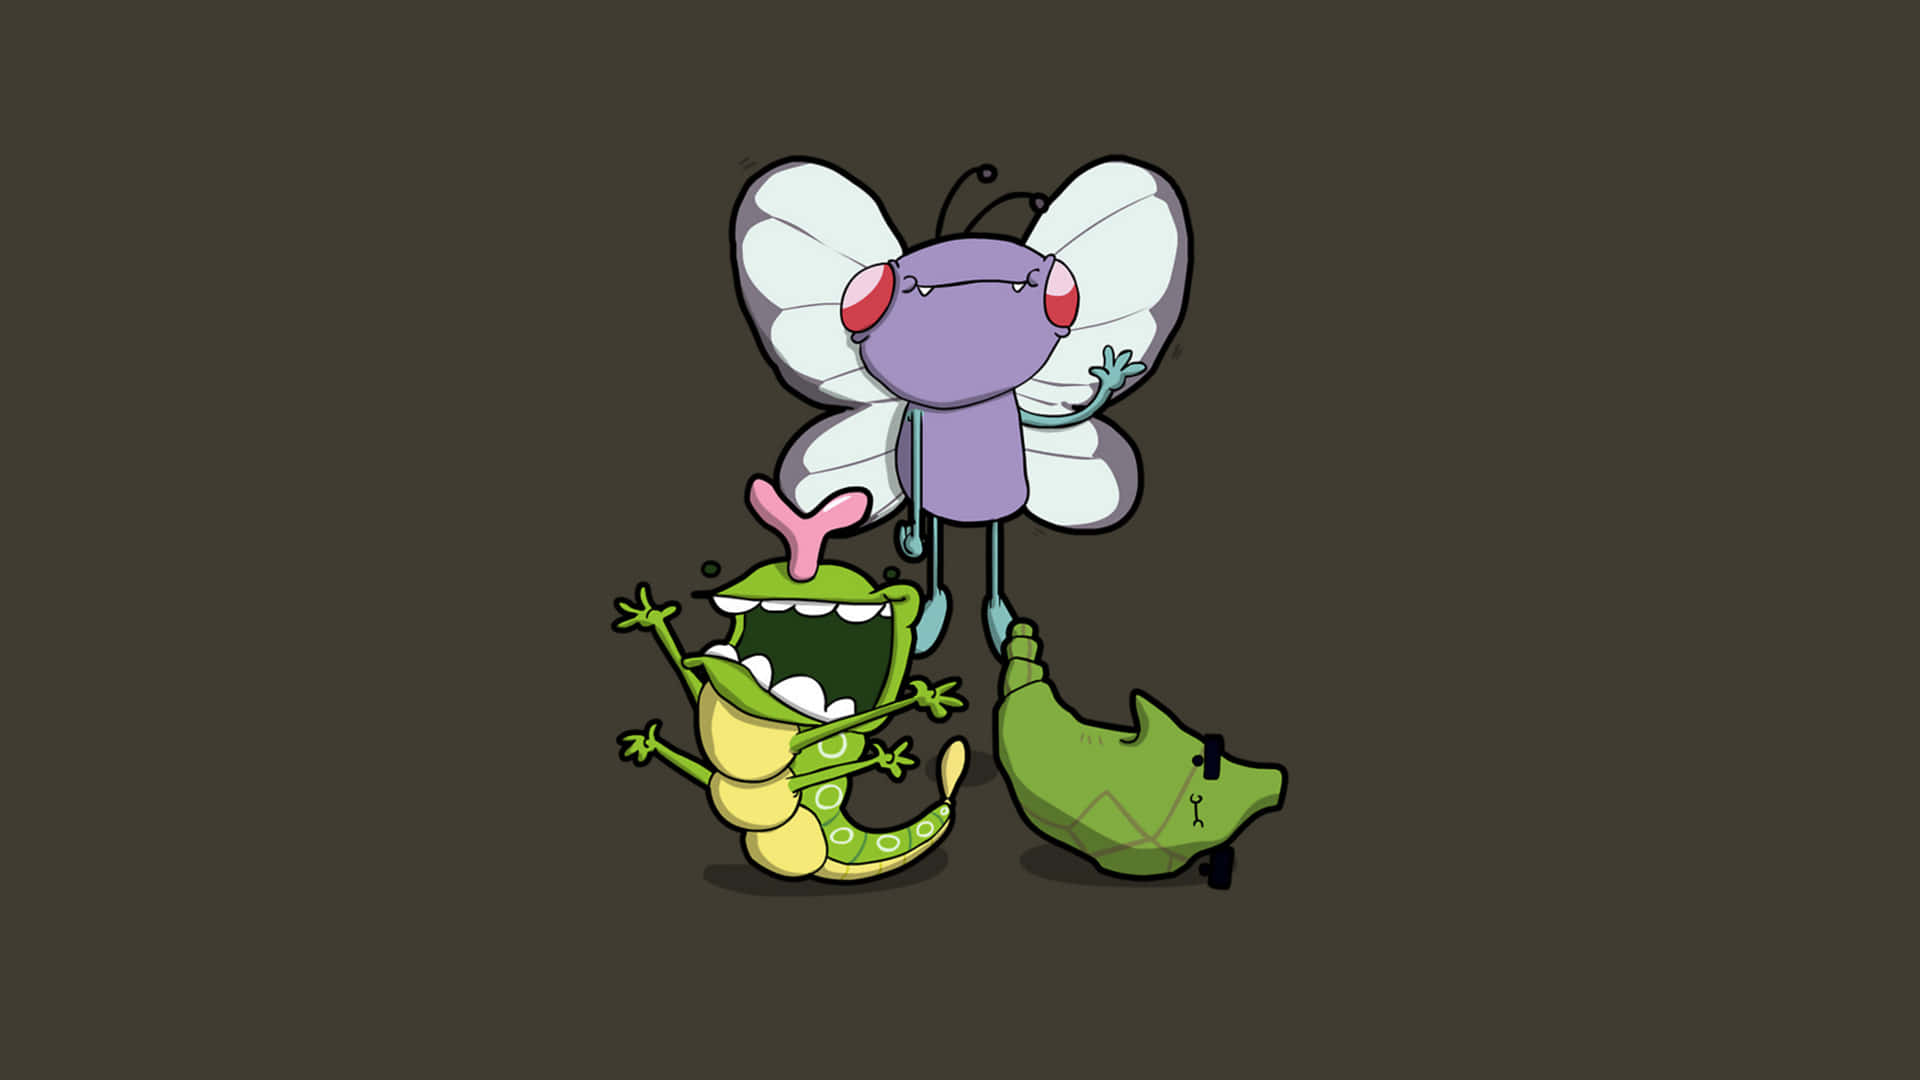 caterpie metapod butterfree